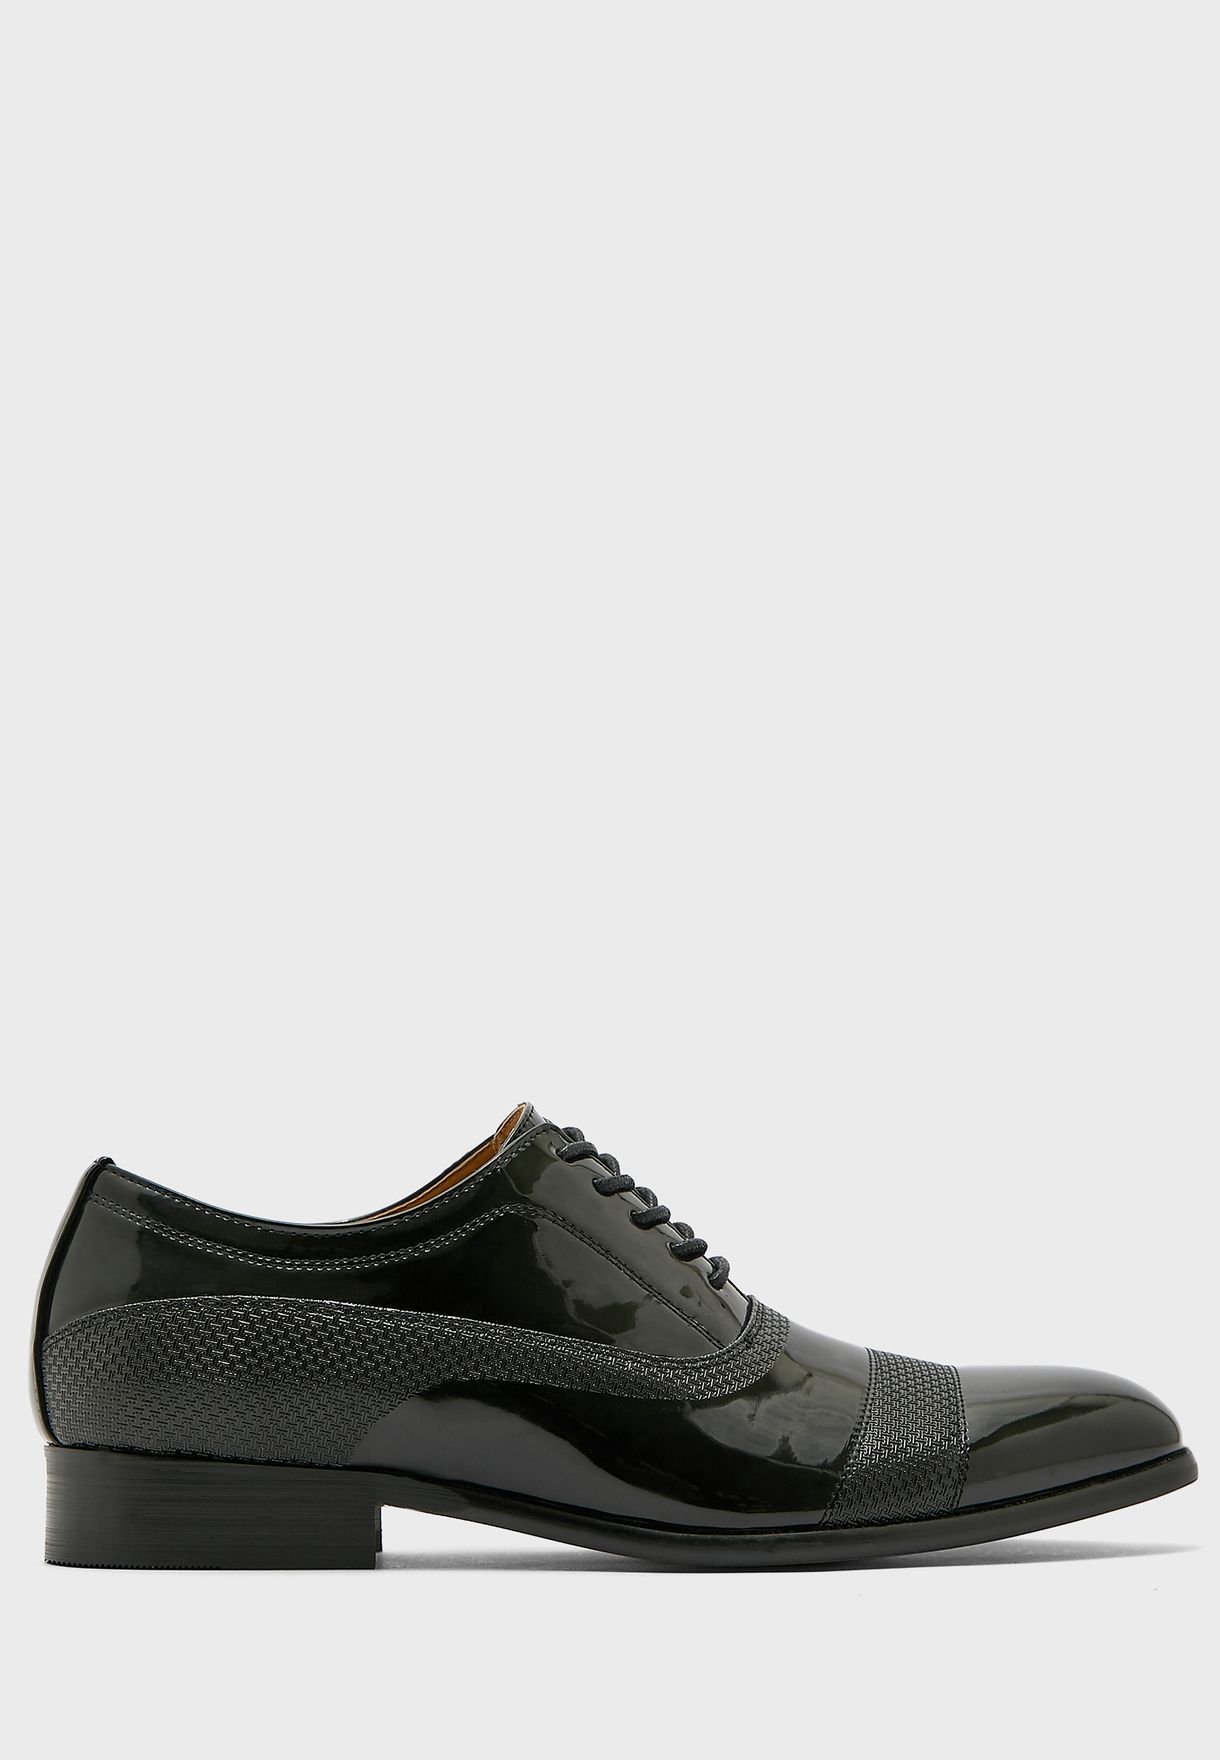 Genuine Patent Leather Formal Lace Ups